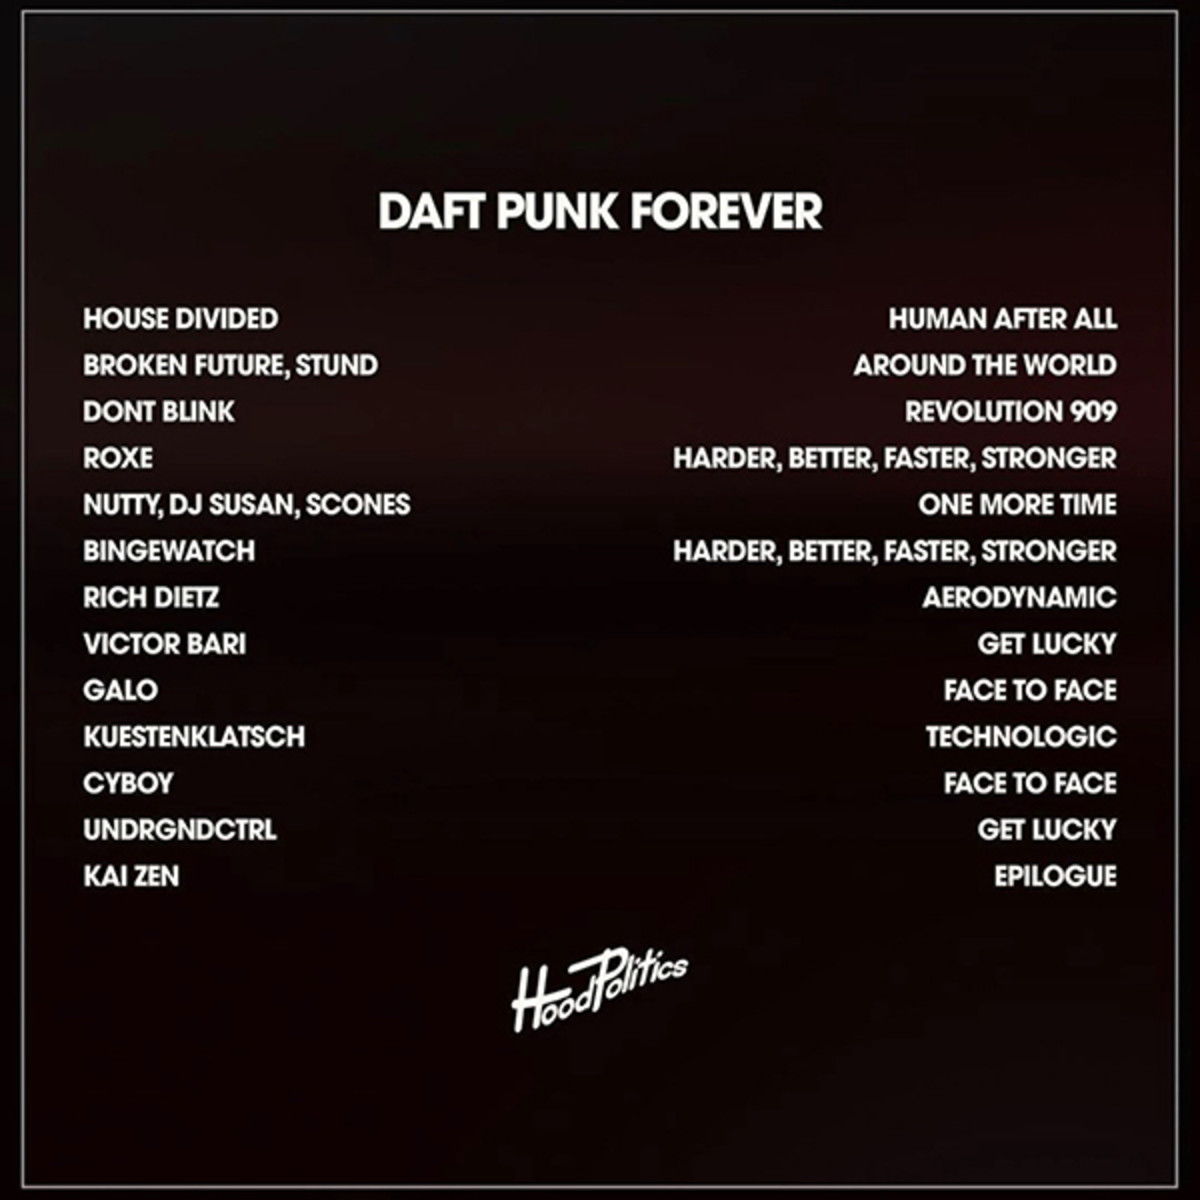 The tracklist of Hood Politics Record's "Daft Punk Forever" compilation.